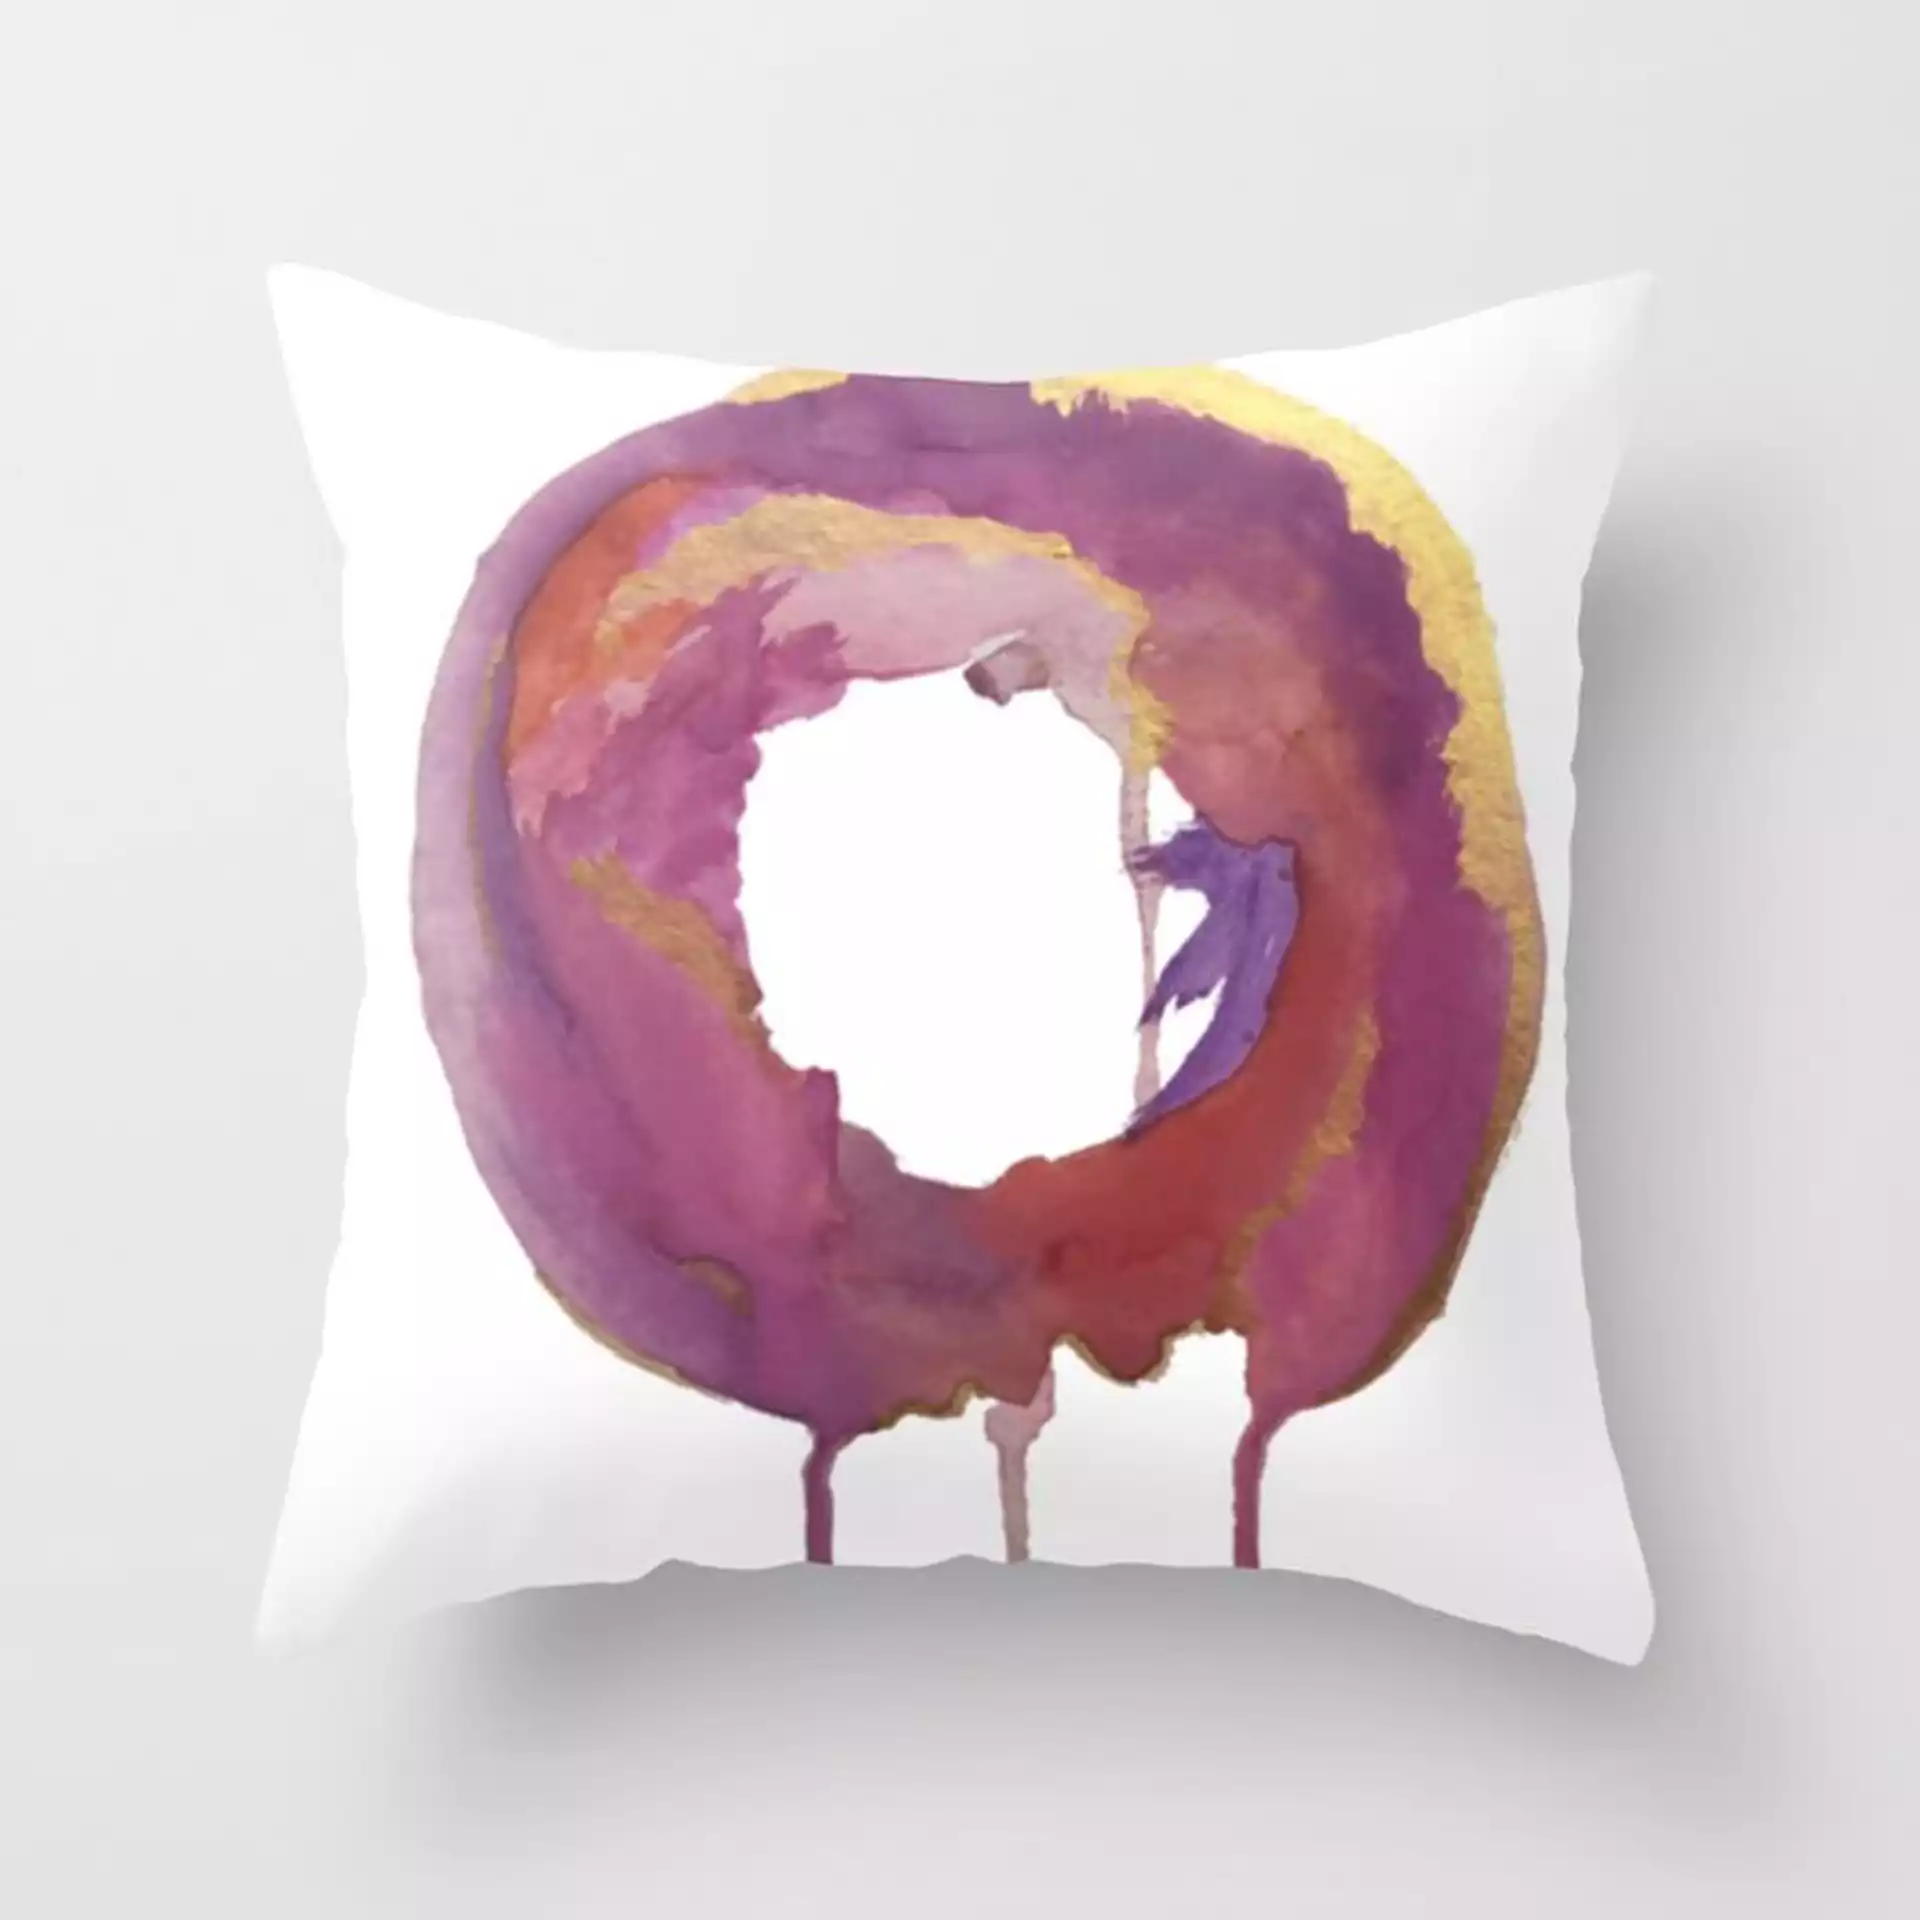 Be Present: A Colorful, Abstract, Circular Piece In Pinks Purples And Gold Couch Throw Pillow by Alyssa Hamilton Art - Cover (20" x 20") with pillow insert - Outdoor Pillow